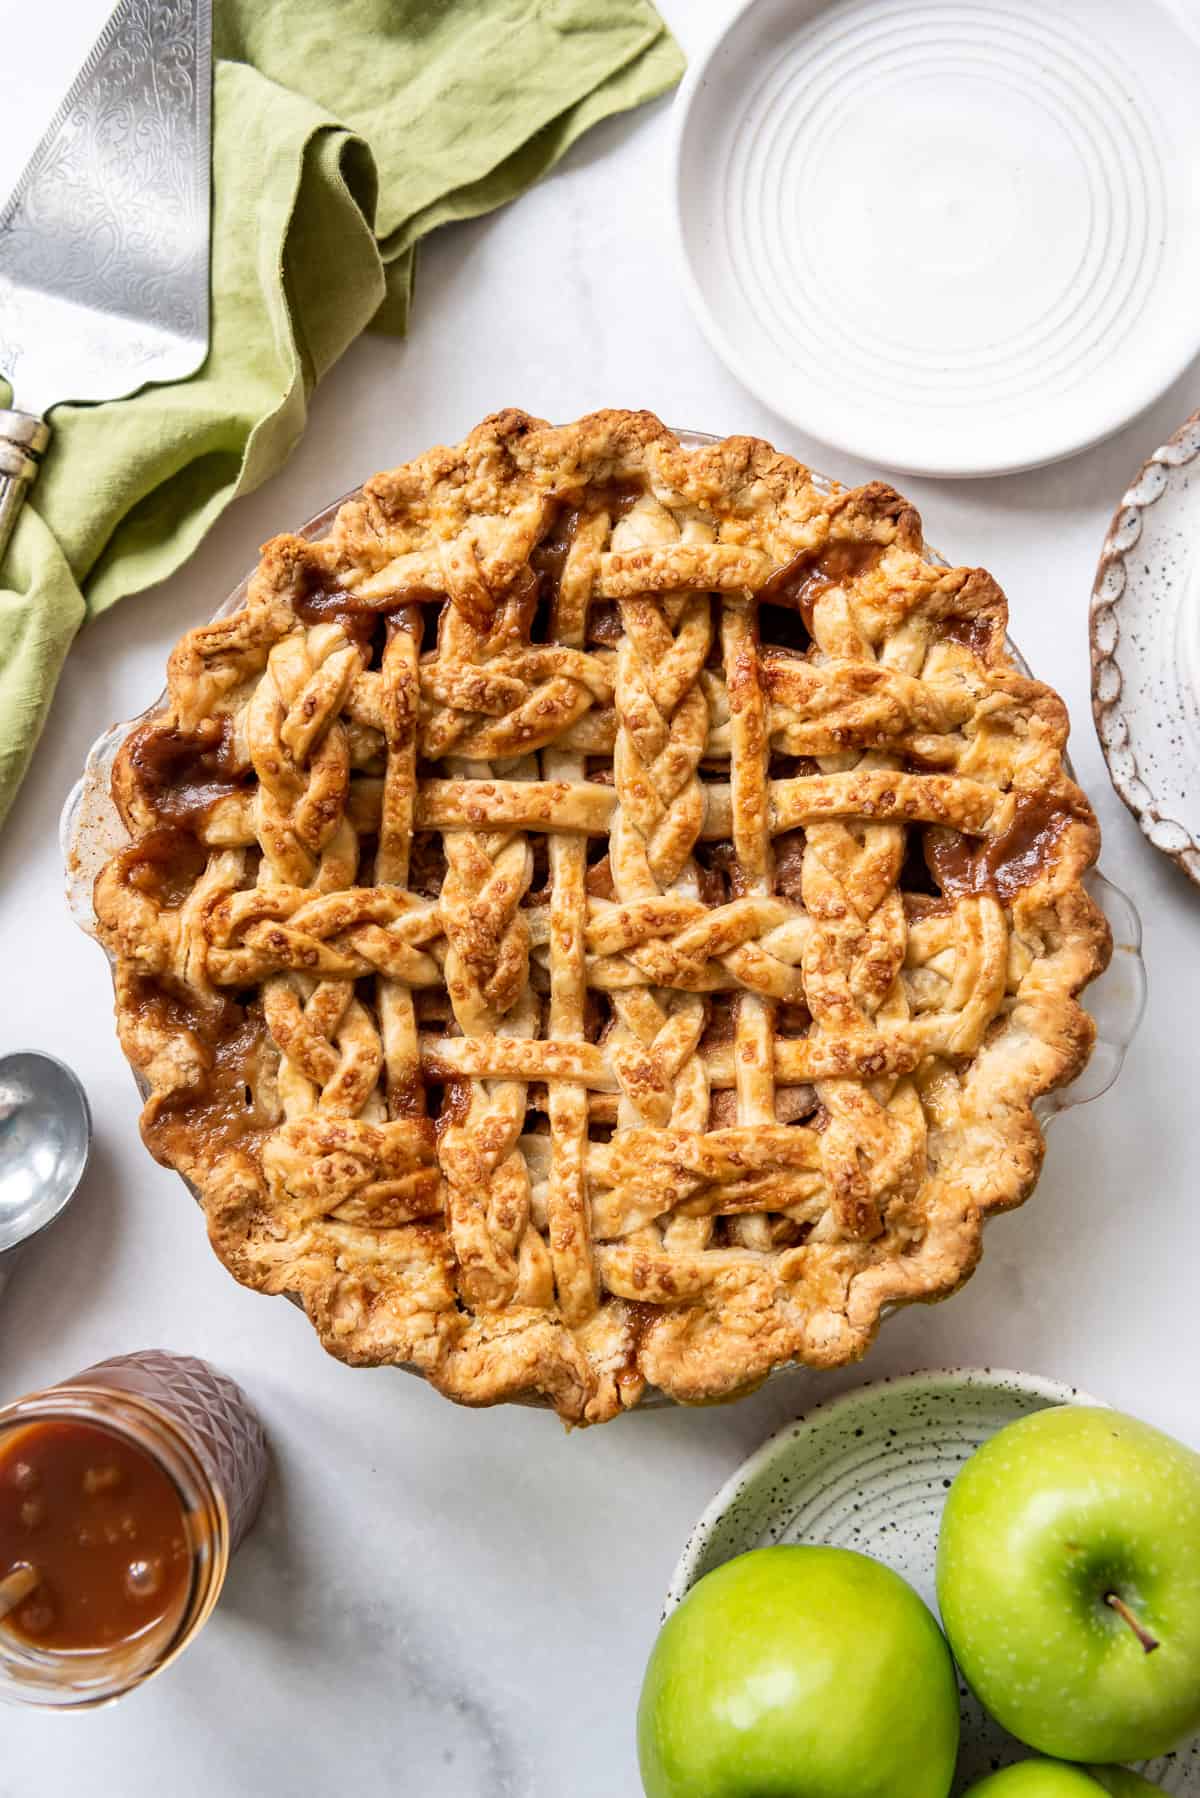 An apple pie with a braided lattice crust next to green granny smith apples and caramel sauce.